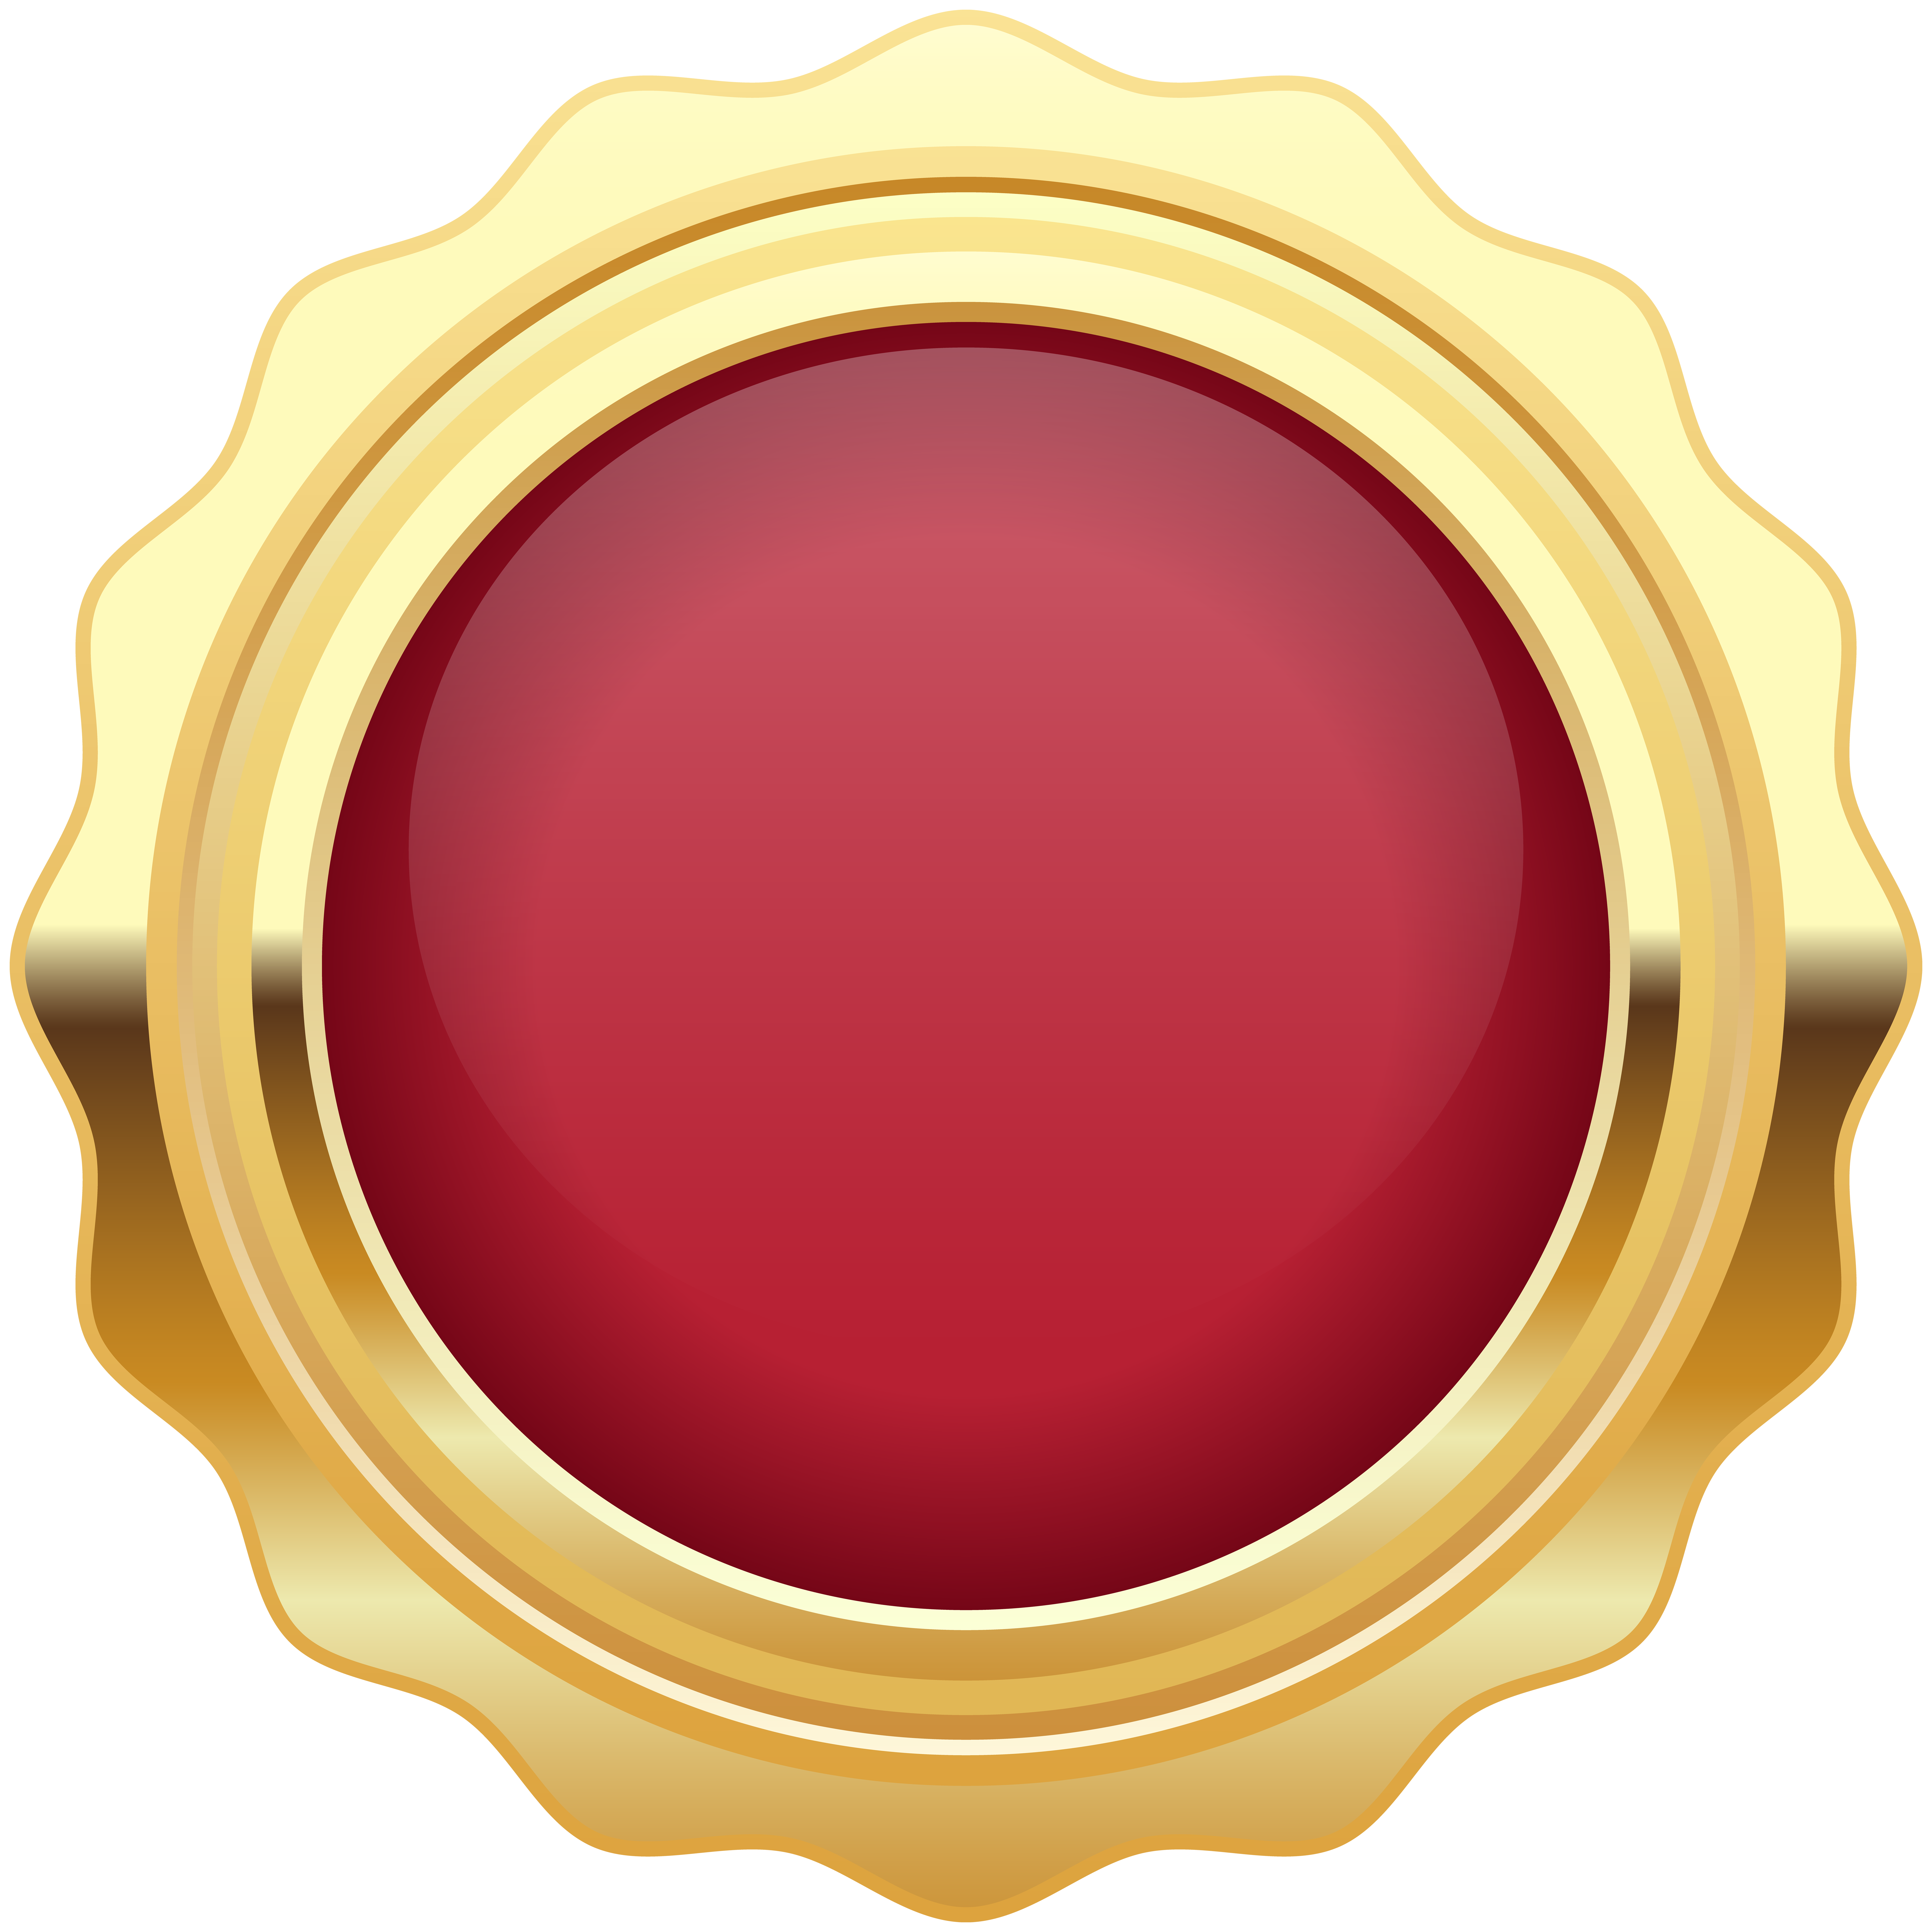 oval clipart red oval